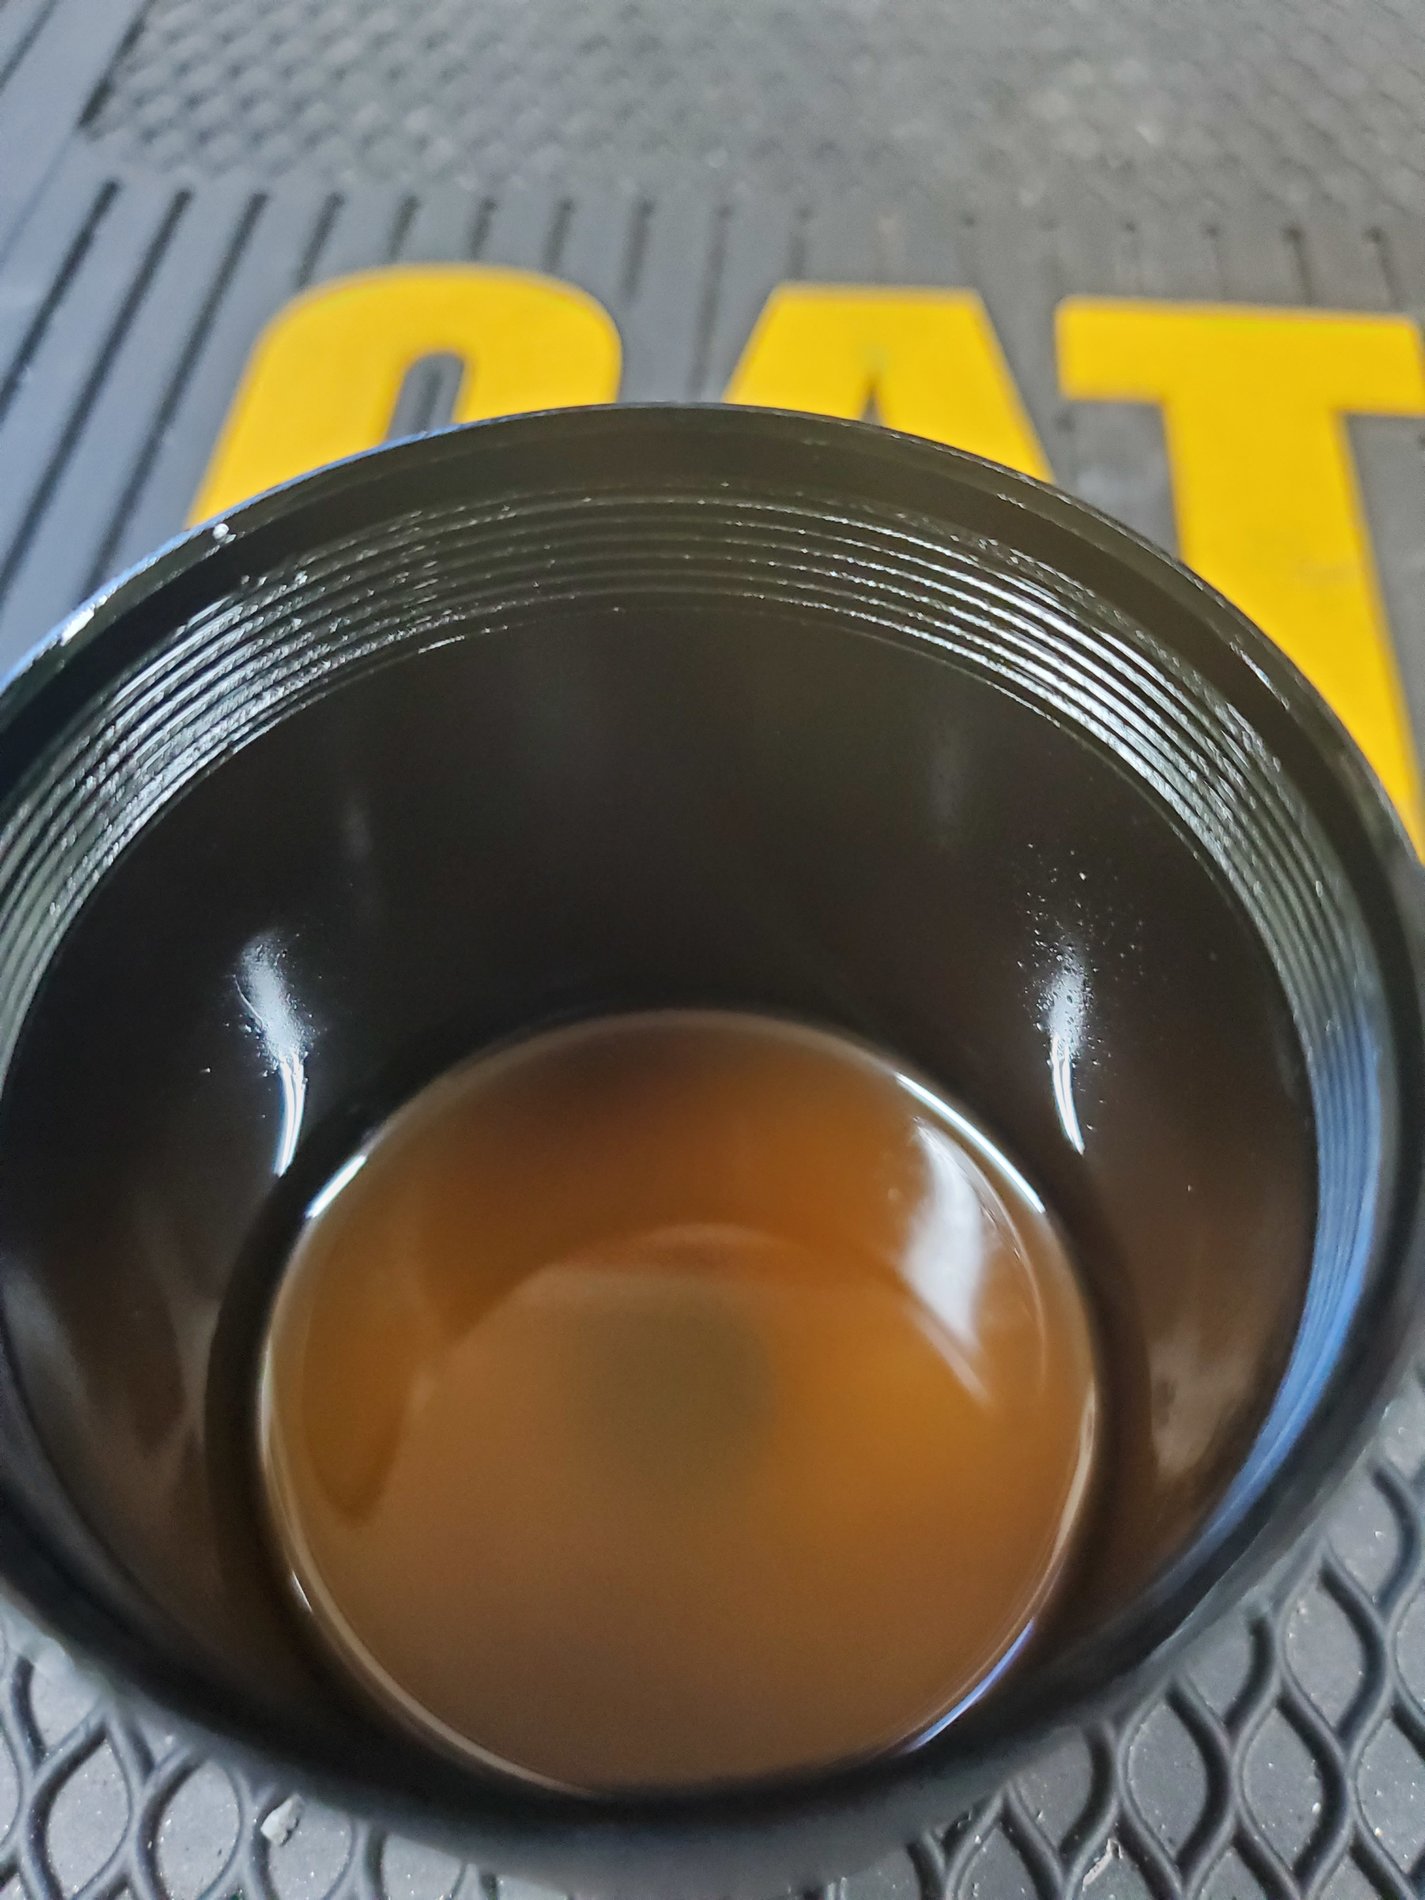 Ford Ranger Oil Catch Can. Yes or No? 20191223_161935